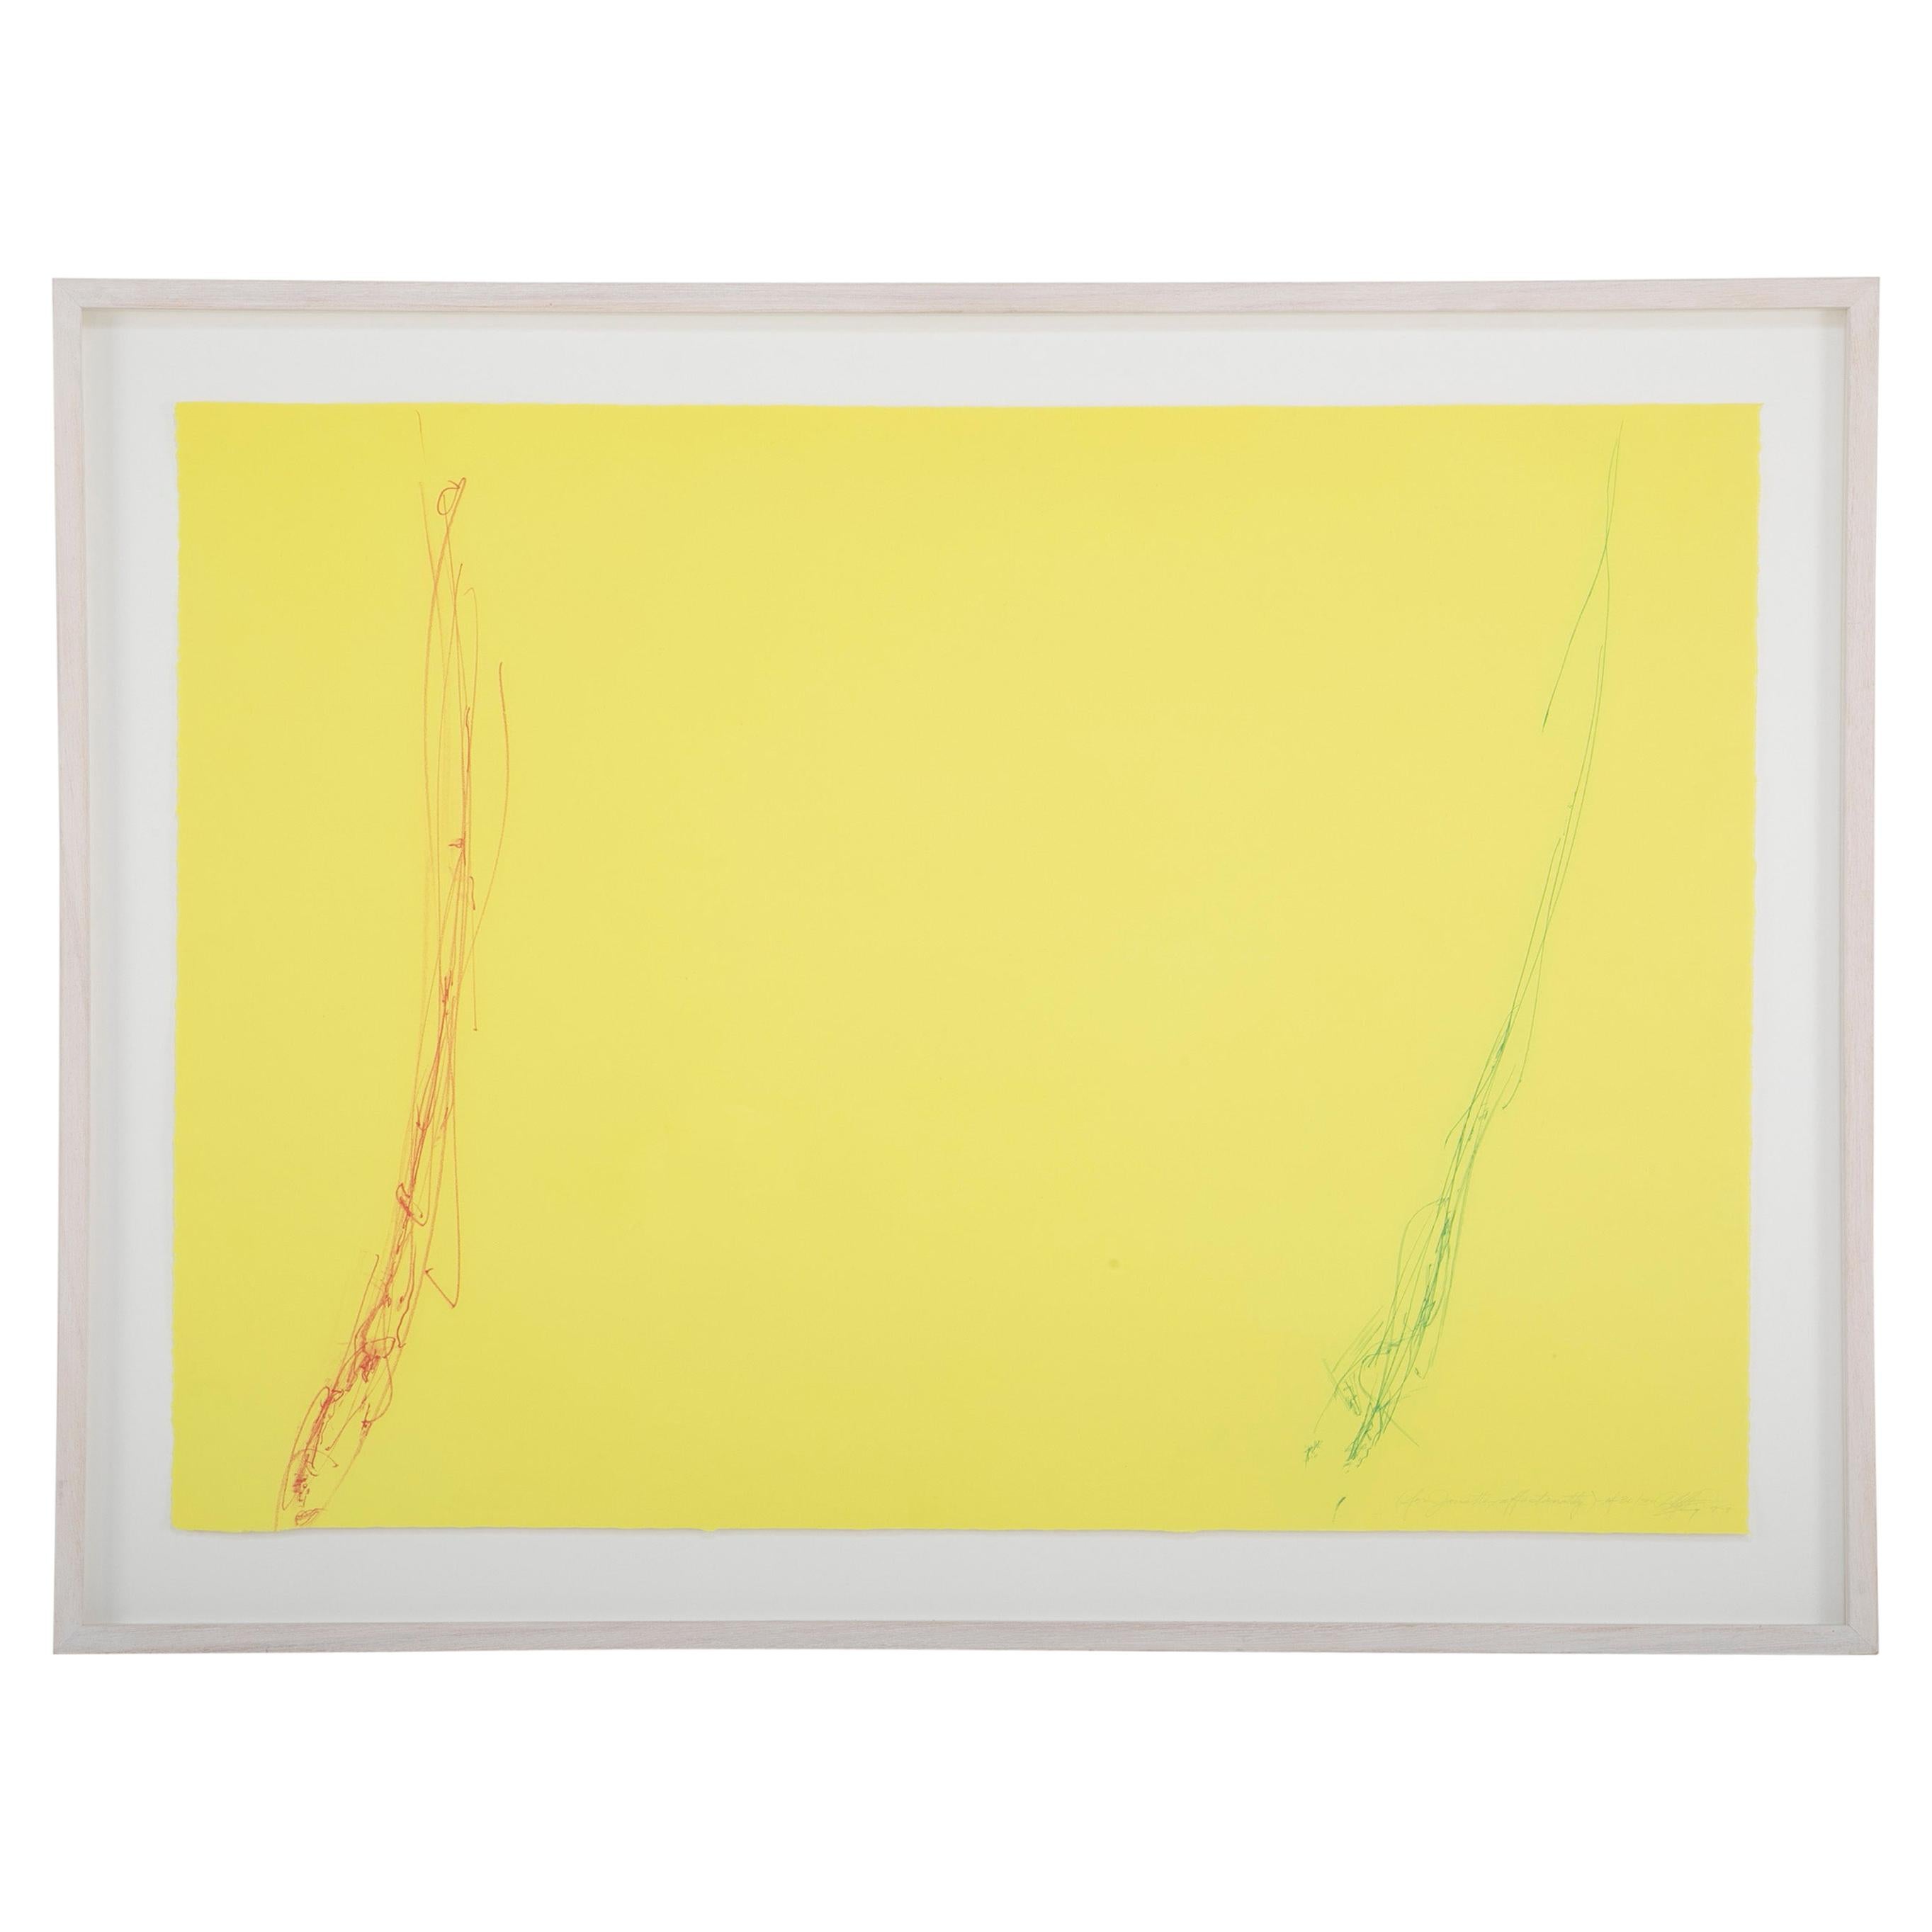 Dan Flavin "for Janette, affectionately" Aquatint in Colors For Sale